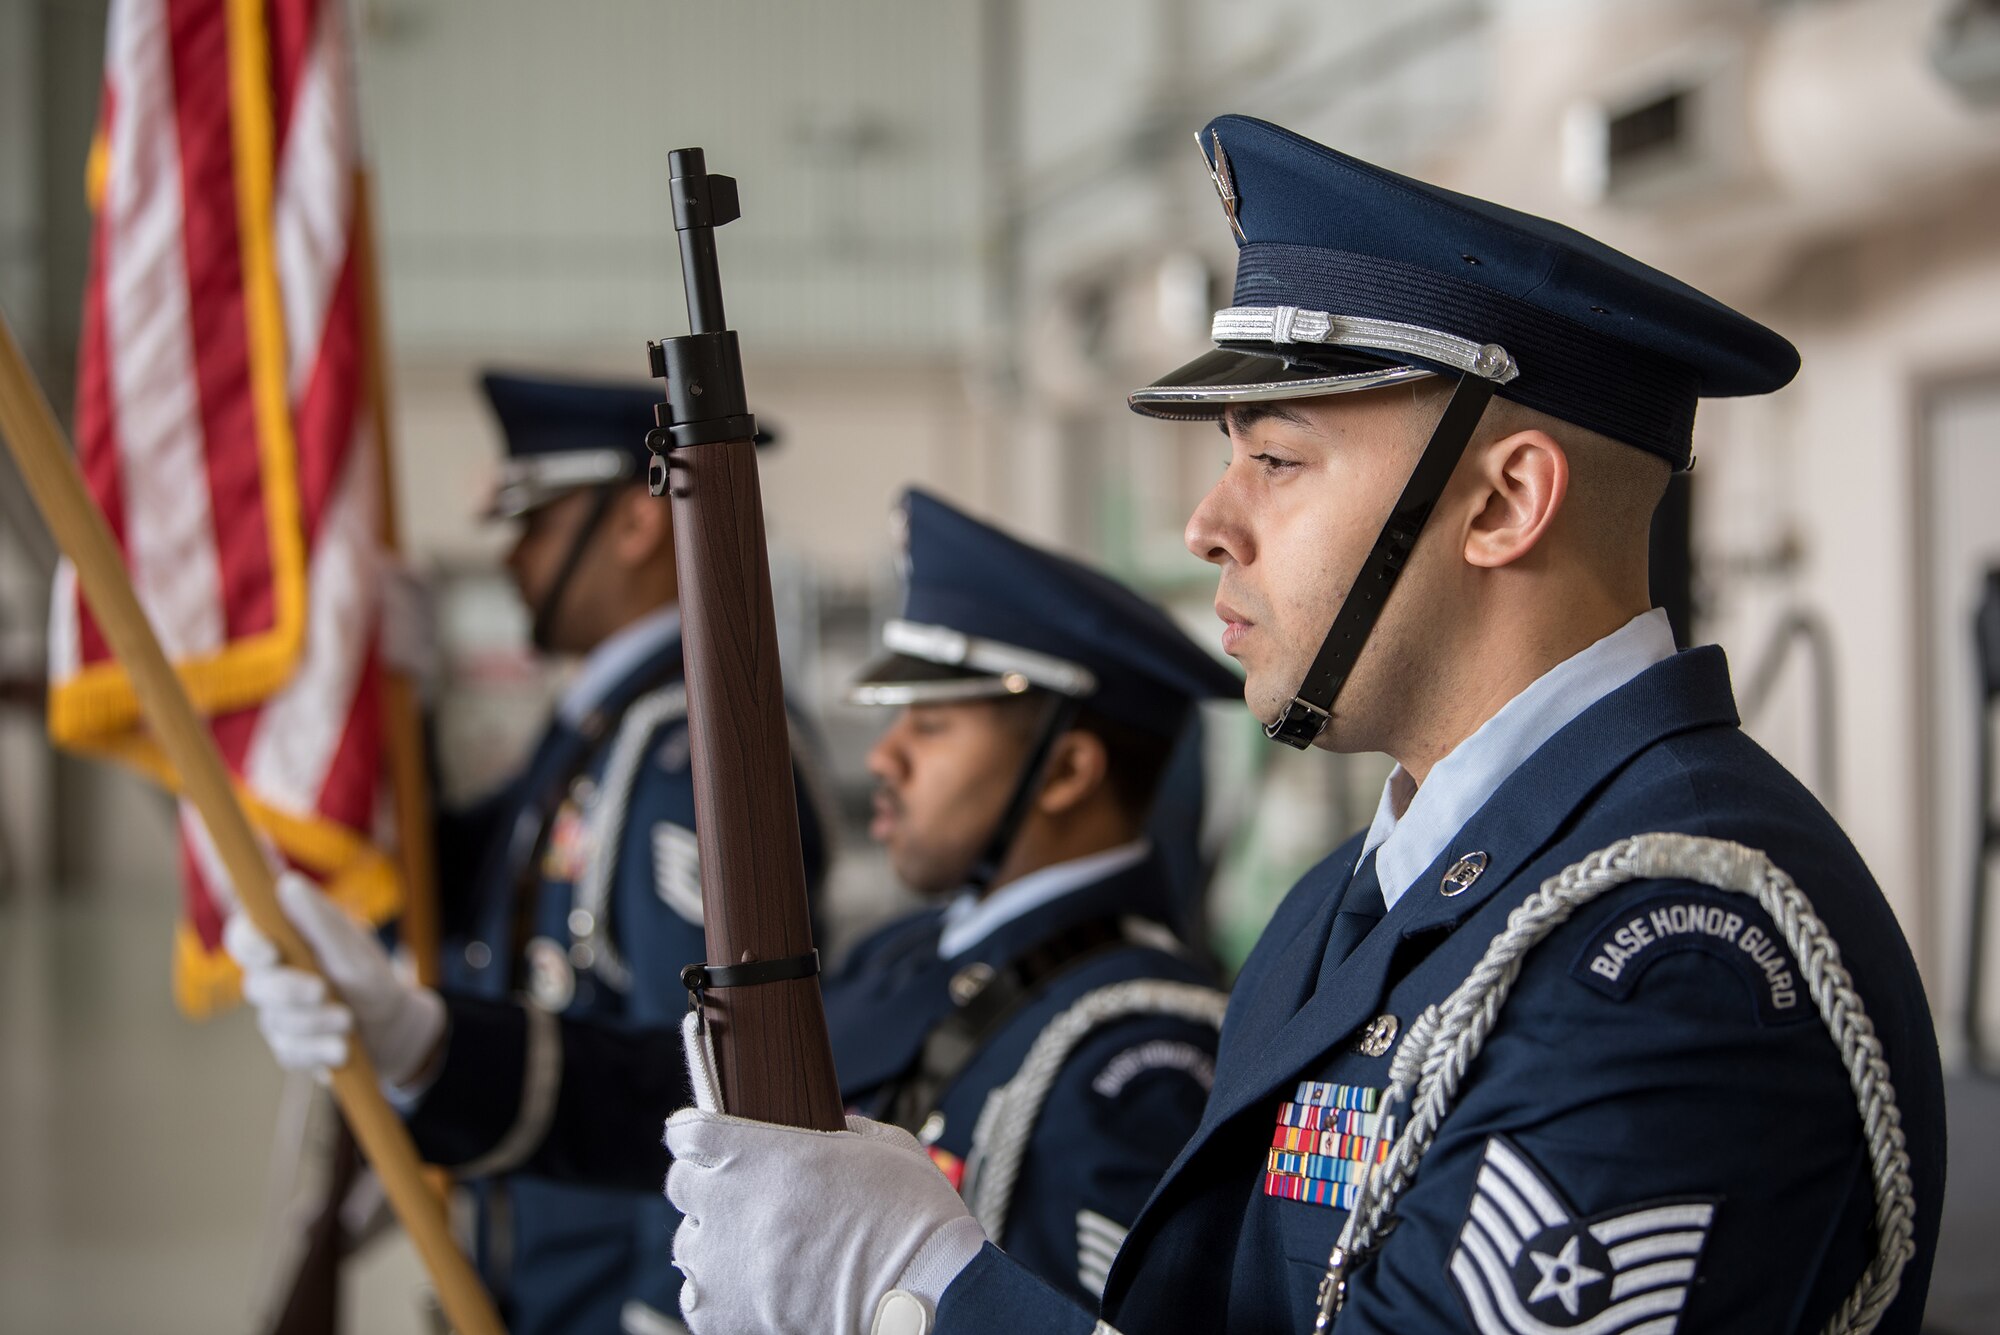 The 123rd Airlift Wing Color Guard presents the colors during a ceremony at the Kentucky Air National Guard Base in Louisville, Ky., March 10, 2019, celebrating the wing’s accomplishments over the past year. The ceremony concluded with the presentation of the wing’s 18th Air Force Outstanding Unit Award. (U.S. Air National Guard photo by Staff Sgt. Joshua Horton)